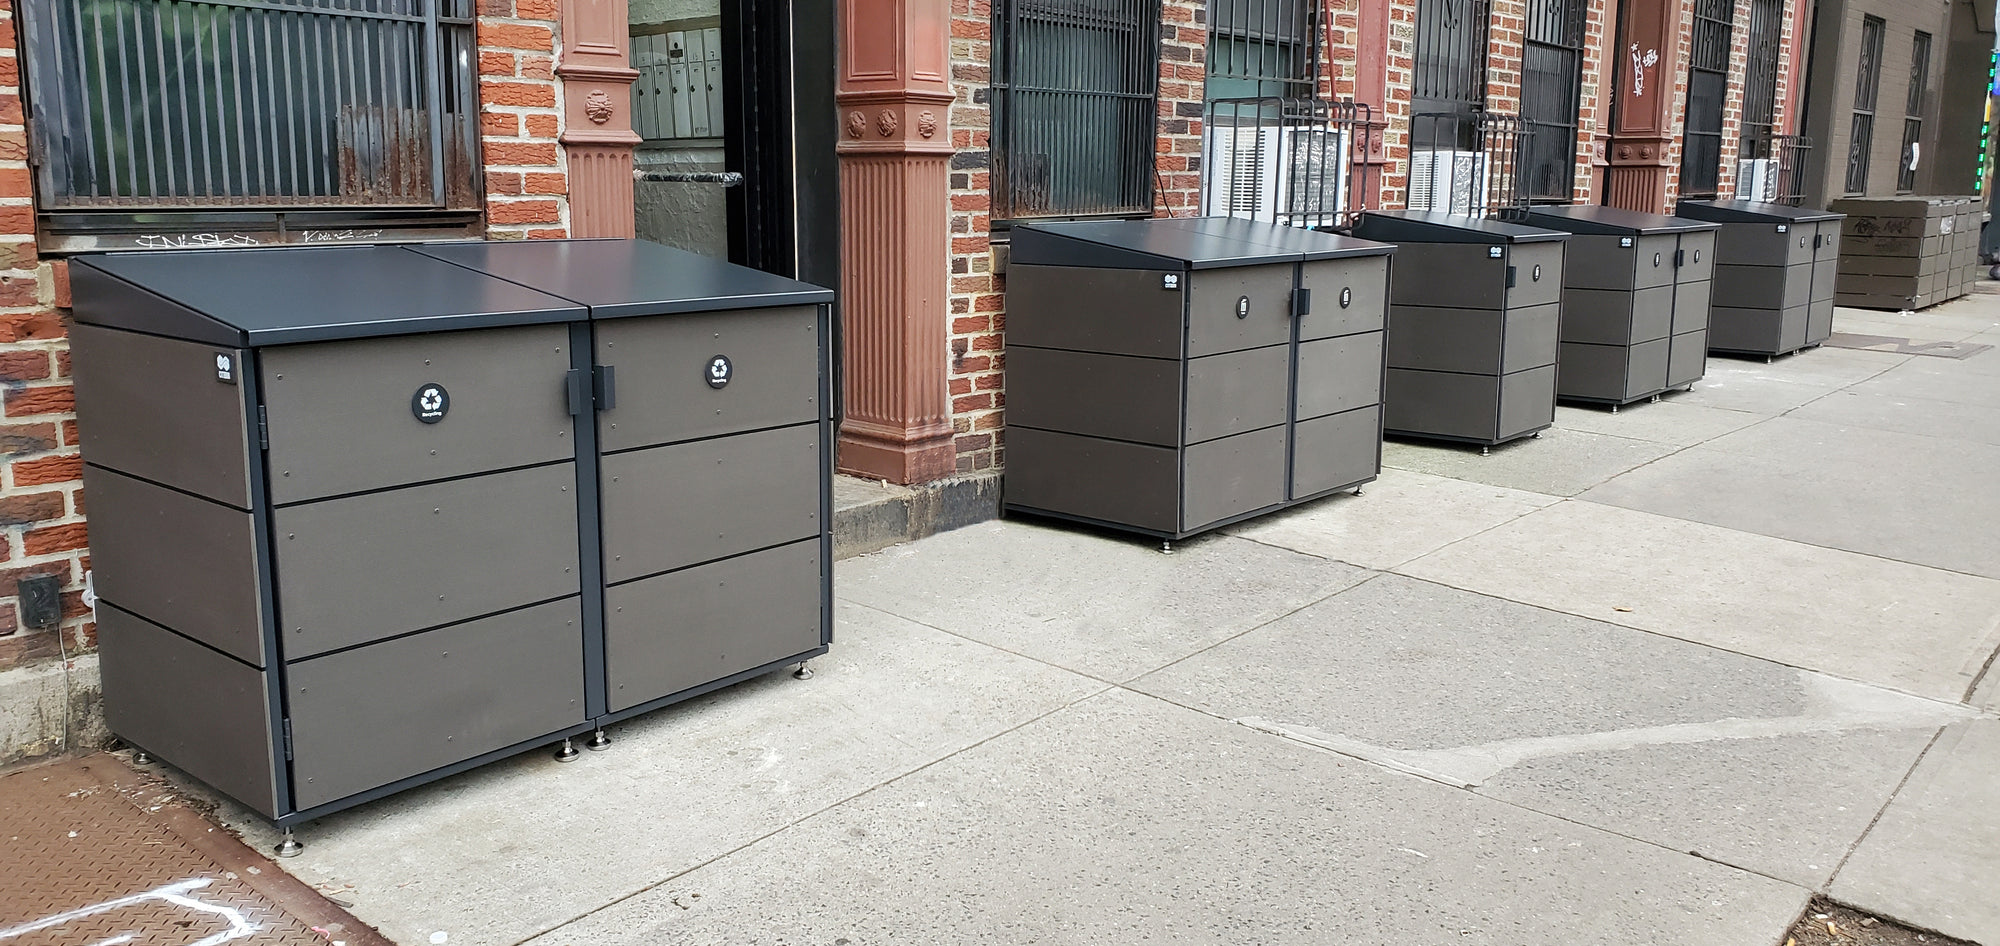 In the Market for a Trash Enclosure?